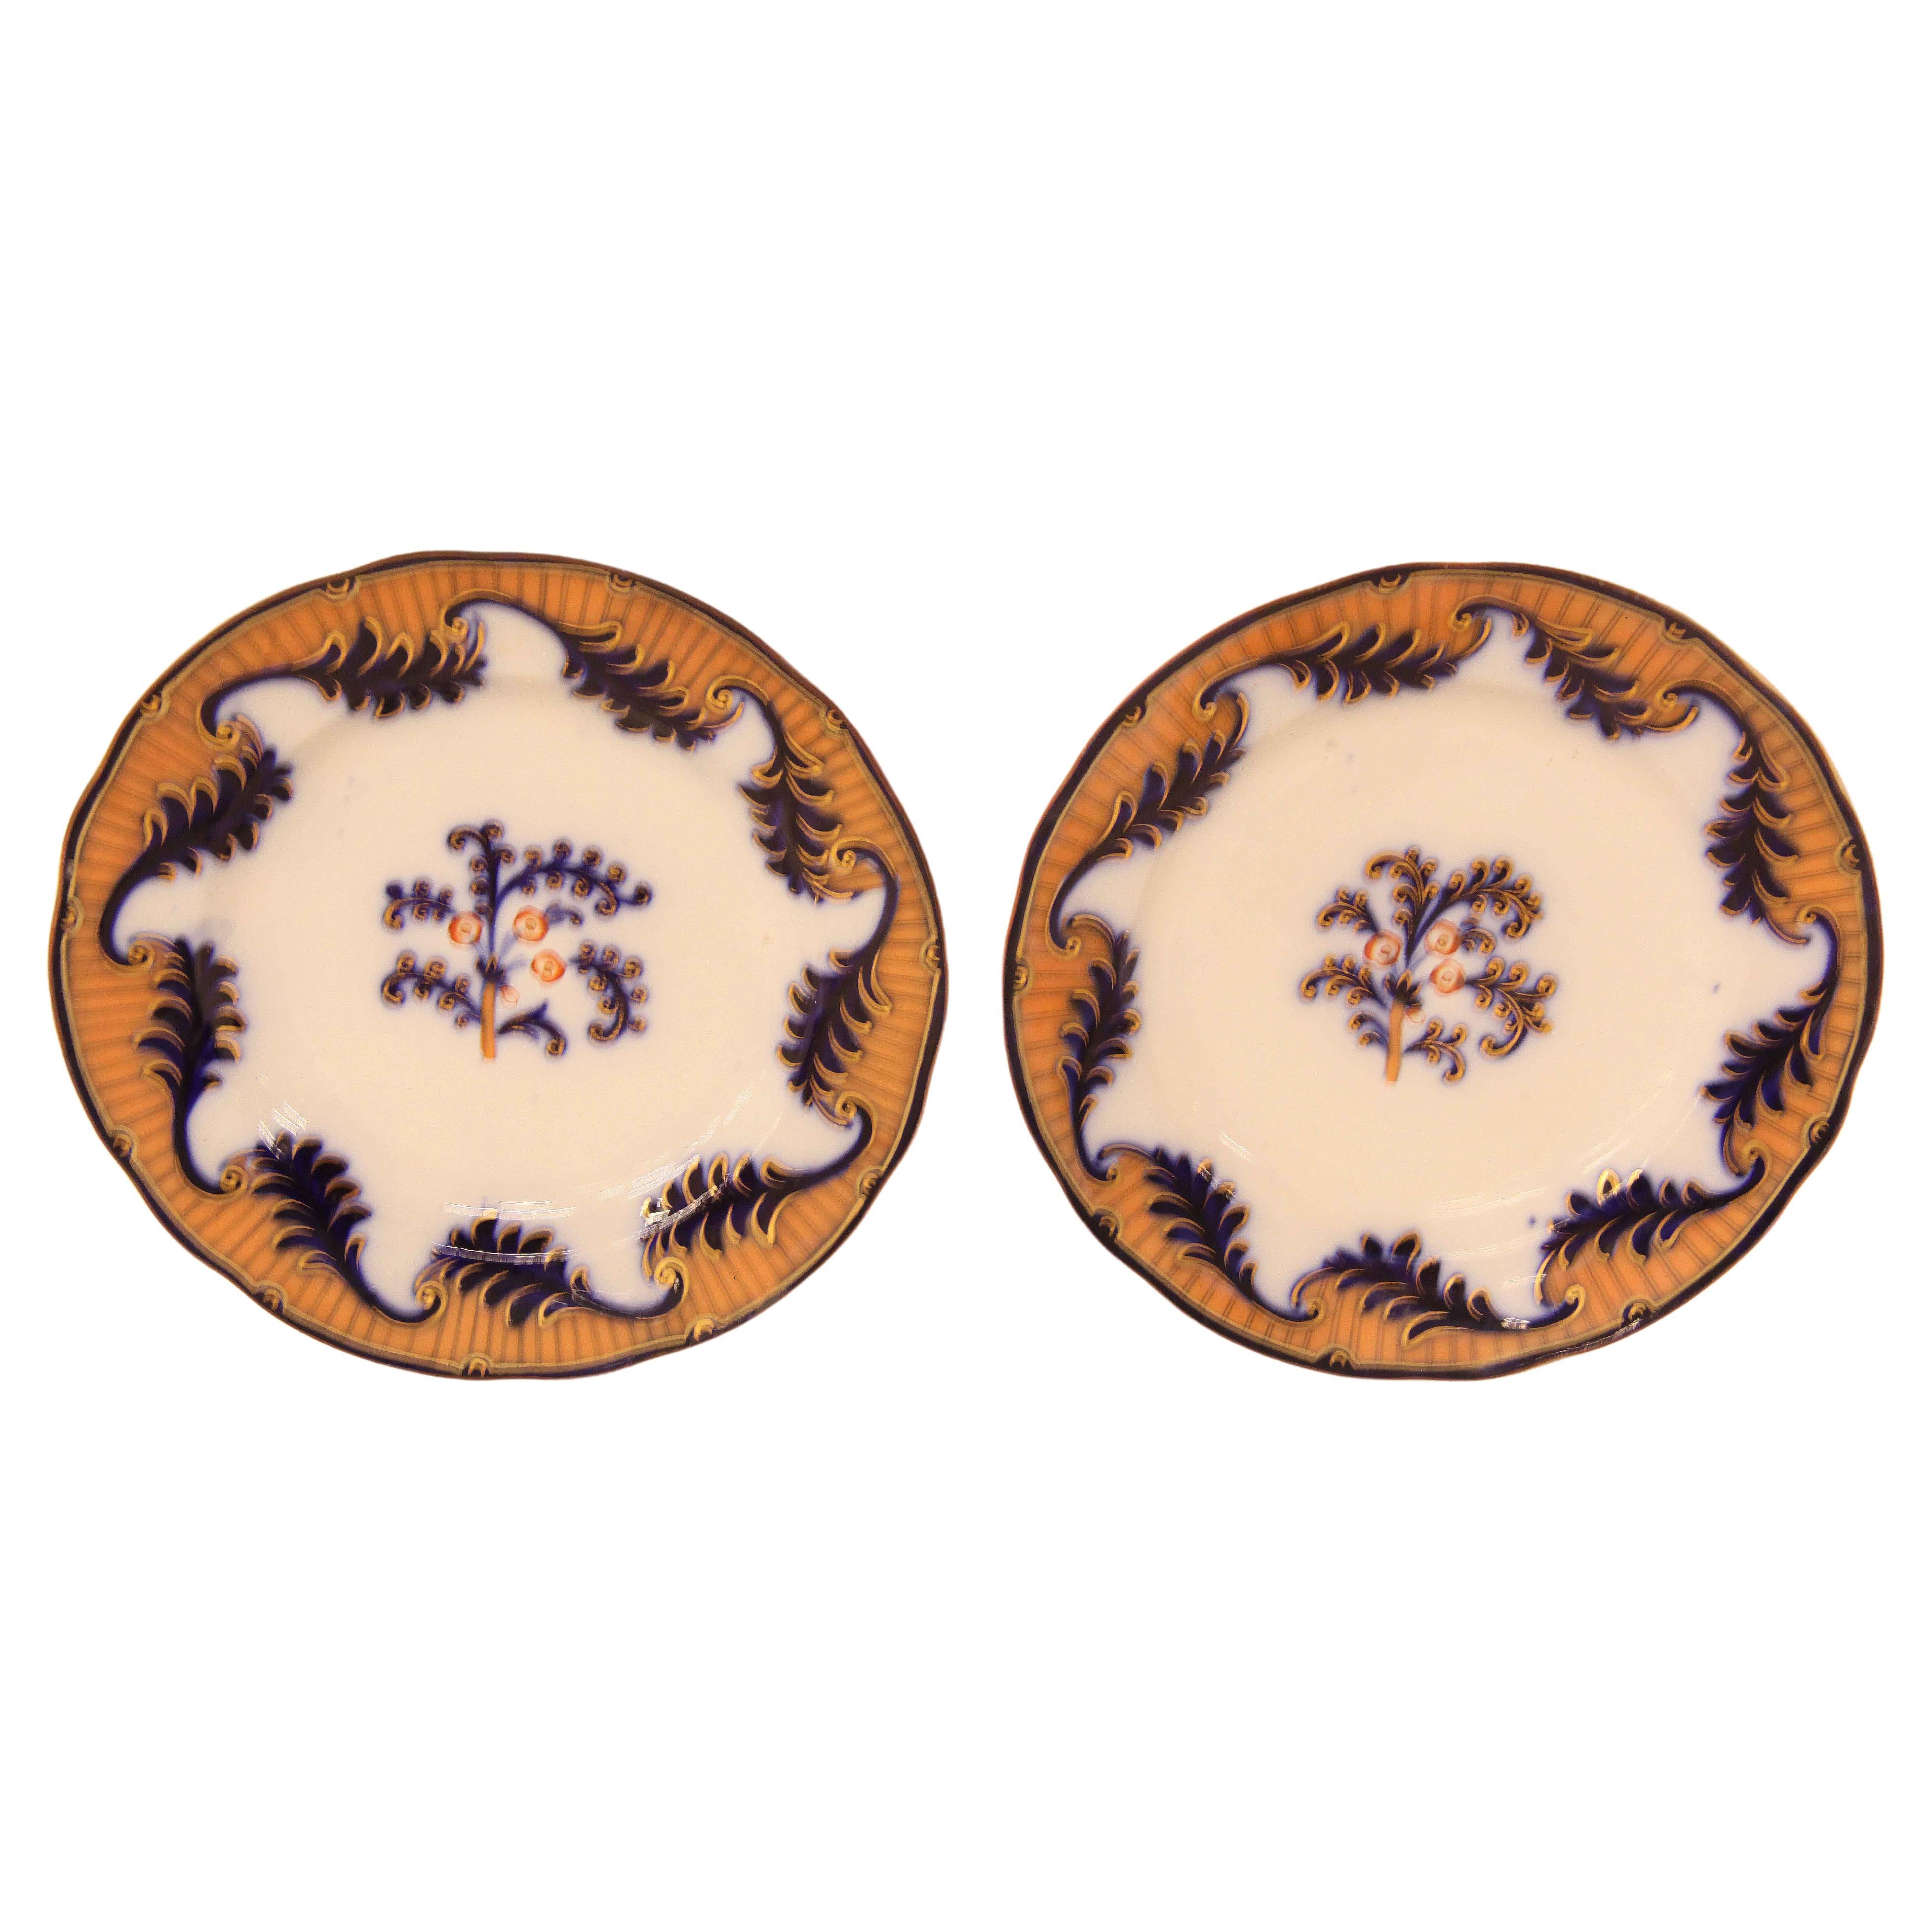 Pair of Flow Blue Staffordshire Plates